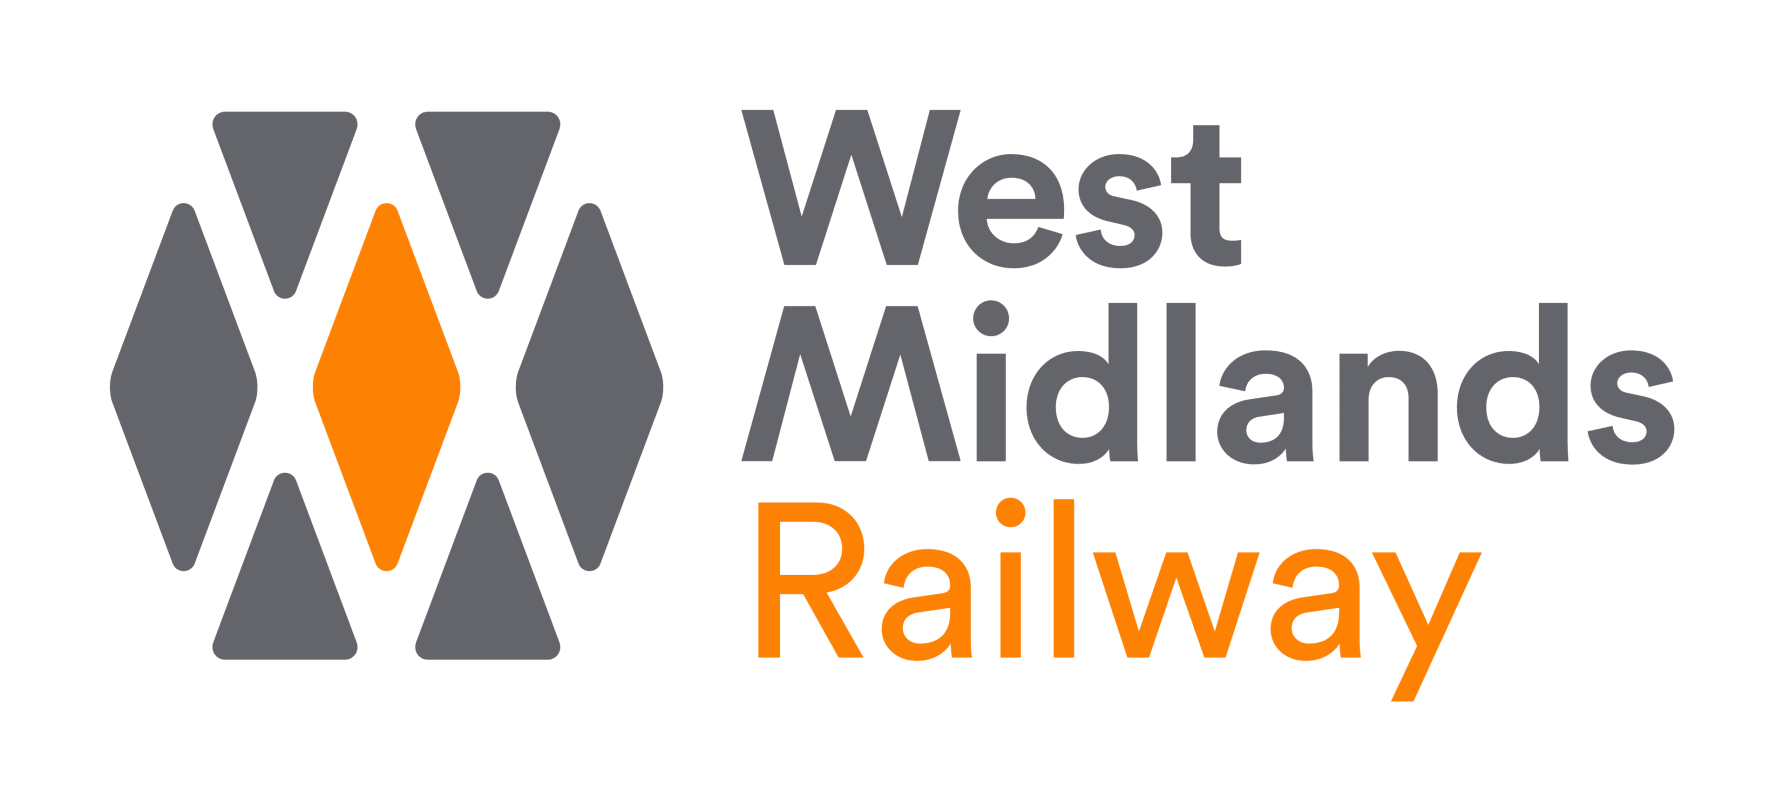 West Midlands Railway to operate revised timetable from Monday 23 March